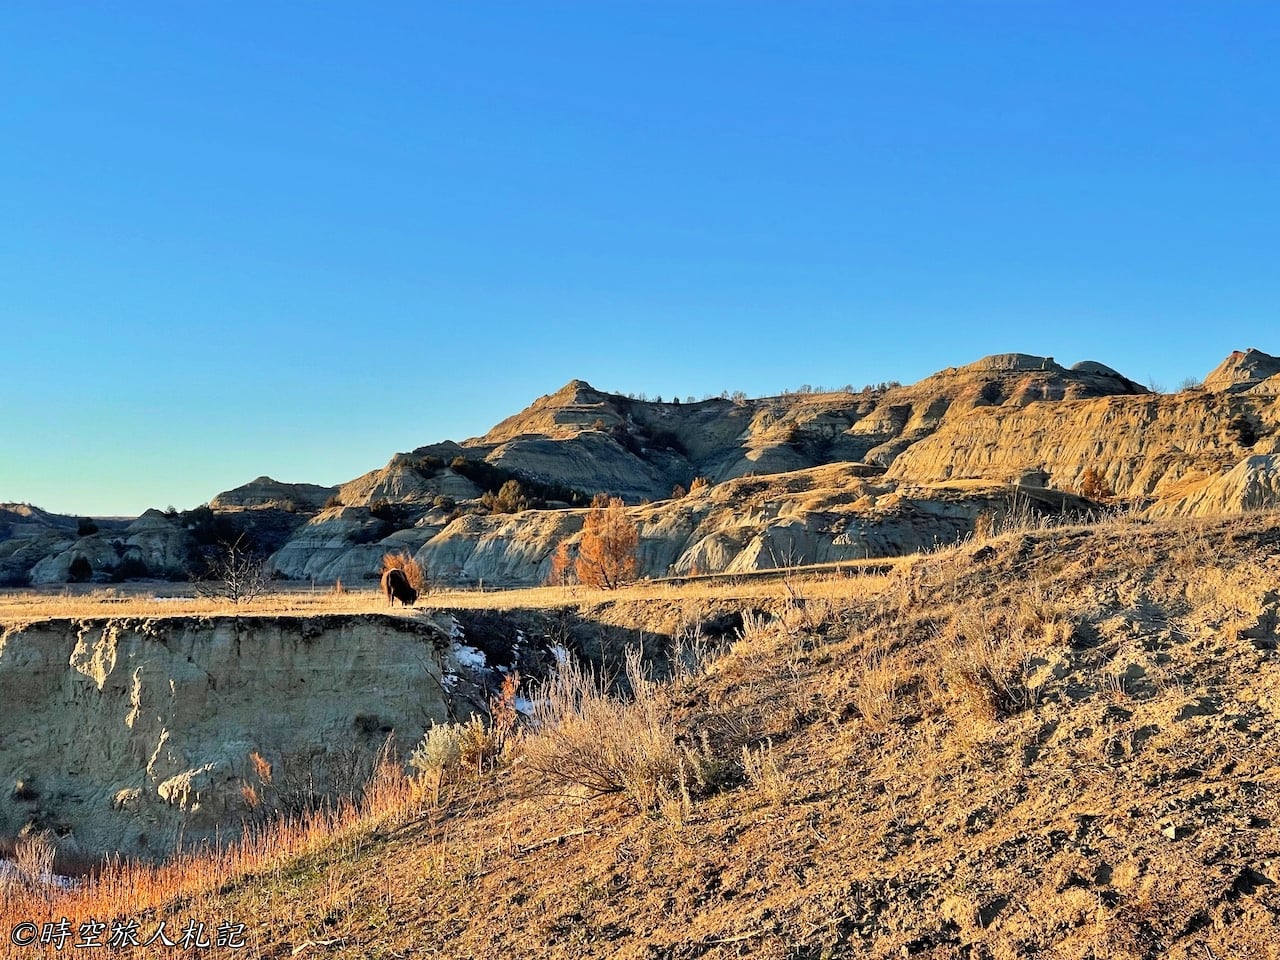 Theodore roosevelt national park,north unit,羅斯福國家公園 39